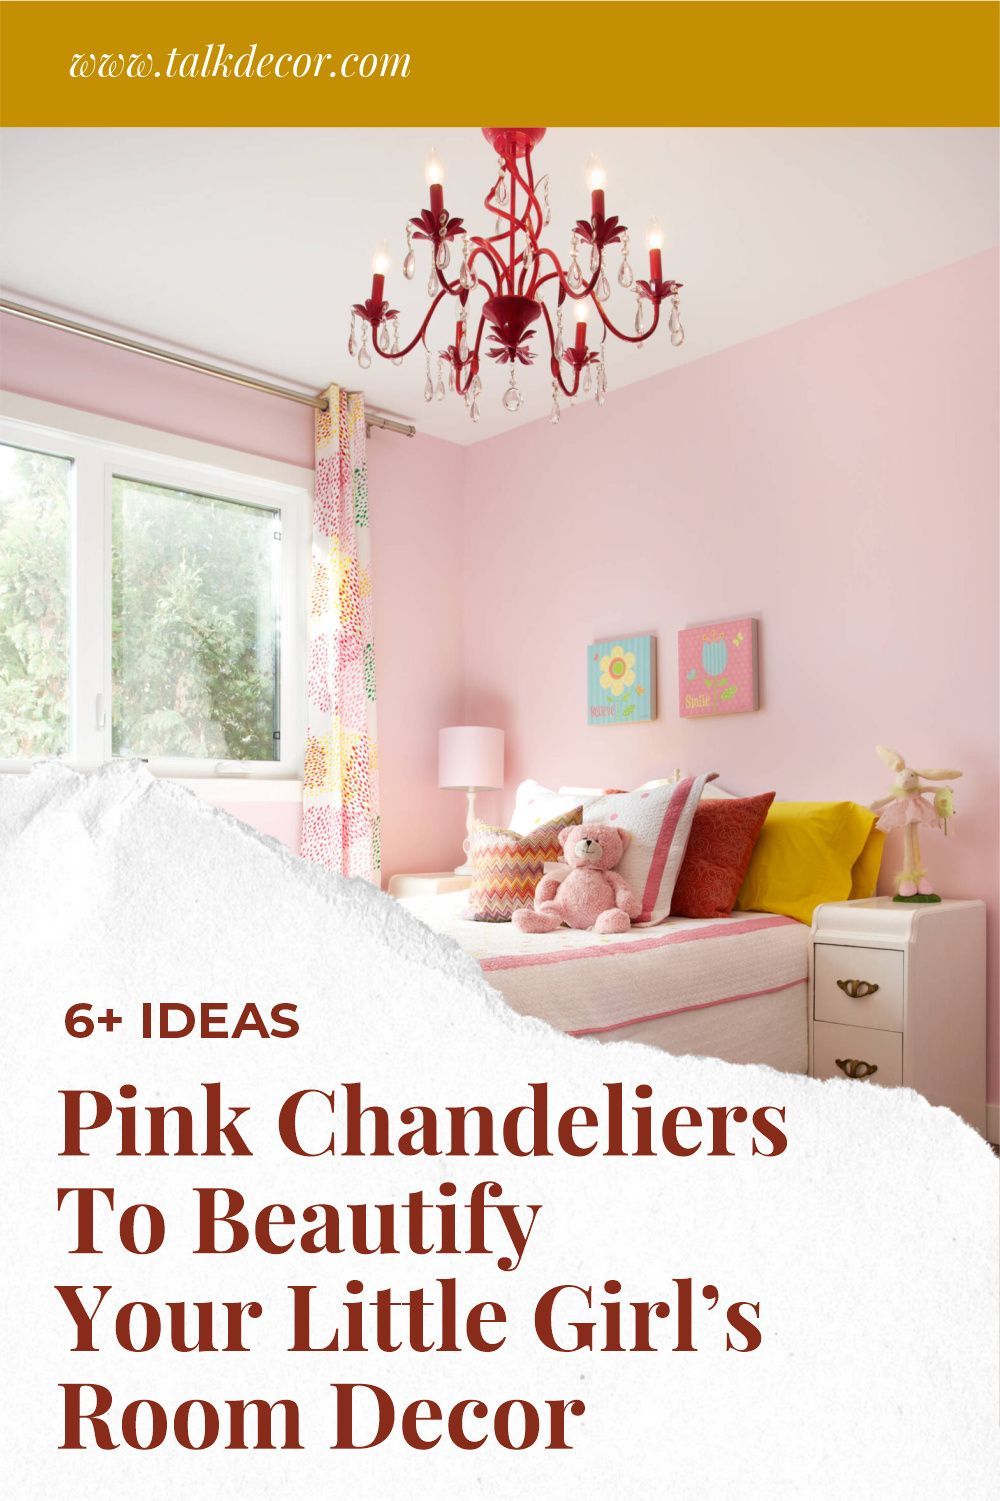 Use a pink chandelier to decorate a girl’s room